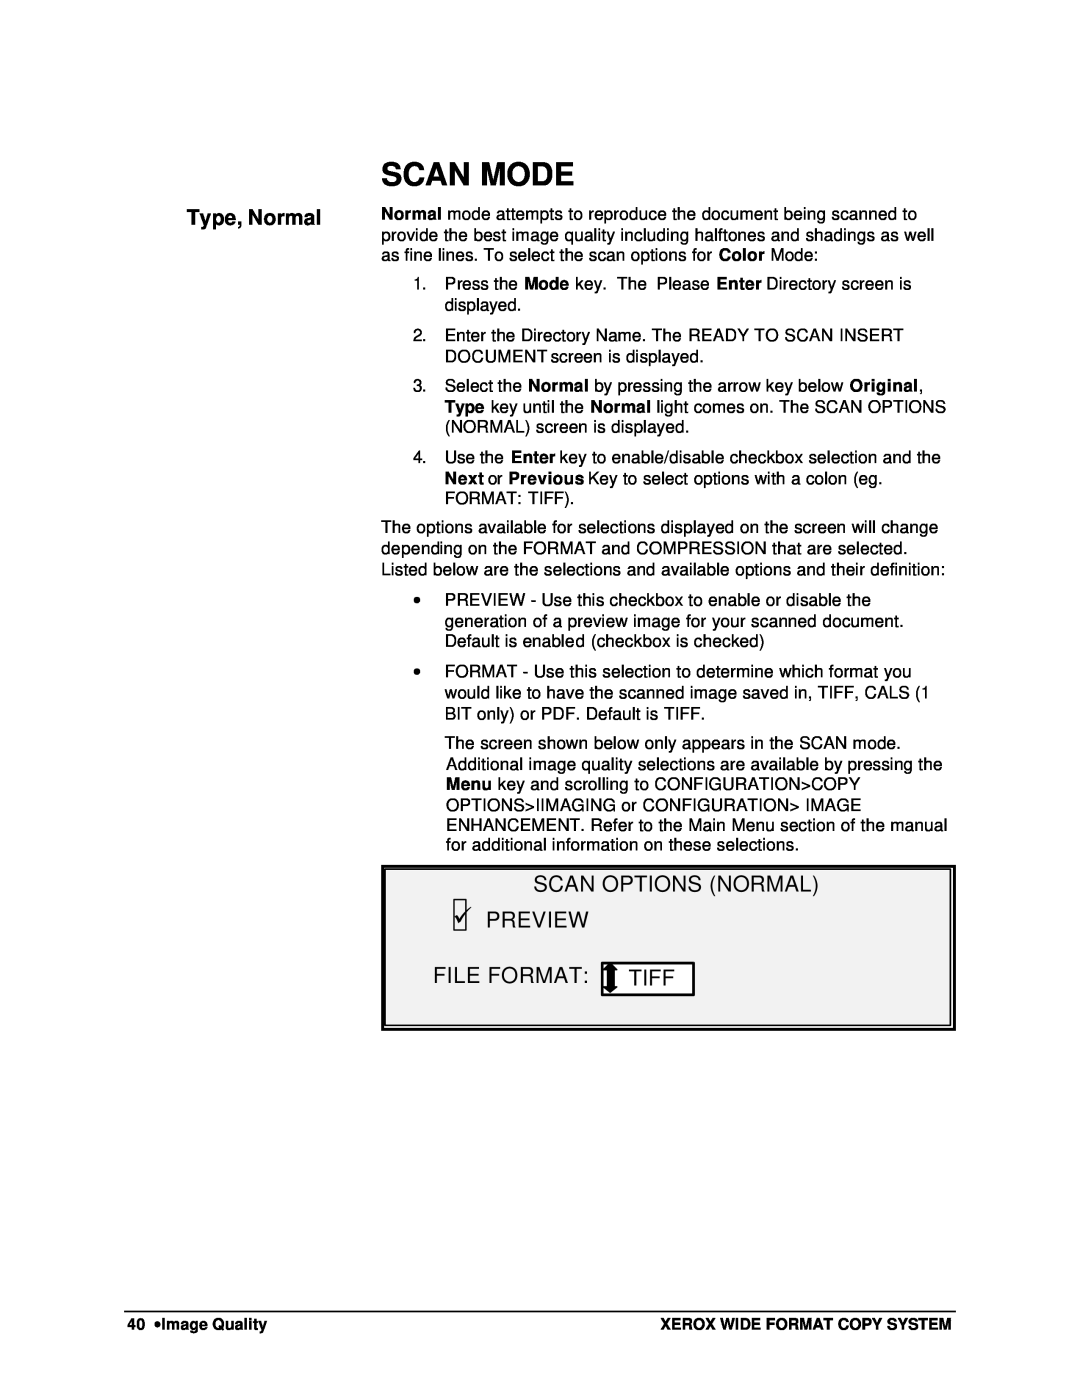 Xerox 8830, 8825, 8850, X2 manual Scan Mode, SCAN OPTIONS NORMAL üPREVIEW FILE FORMAT: TIFF, Type, Normal 